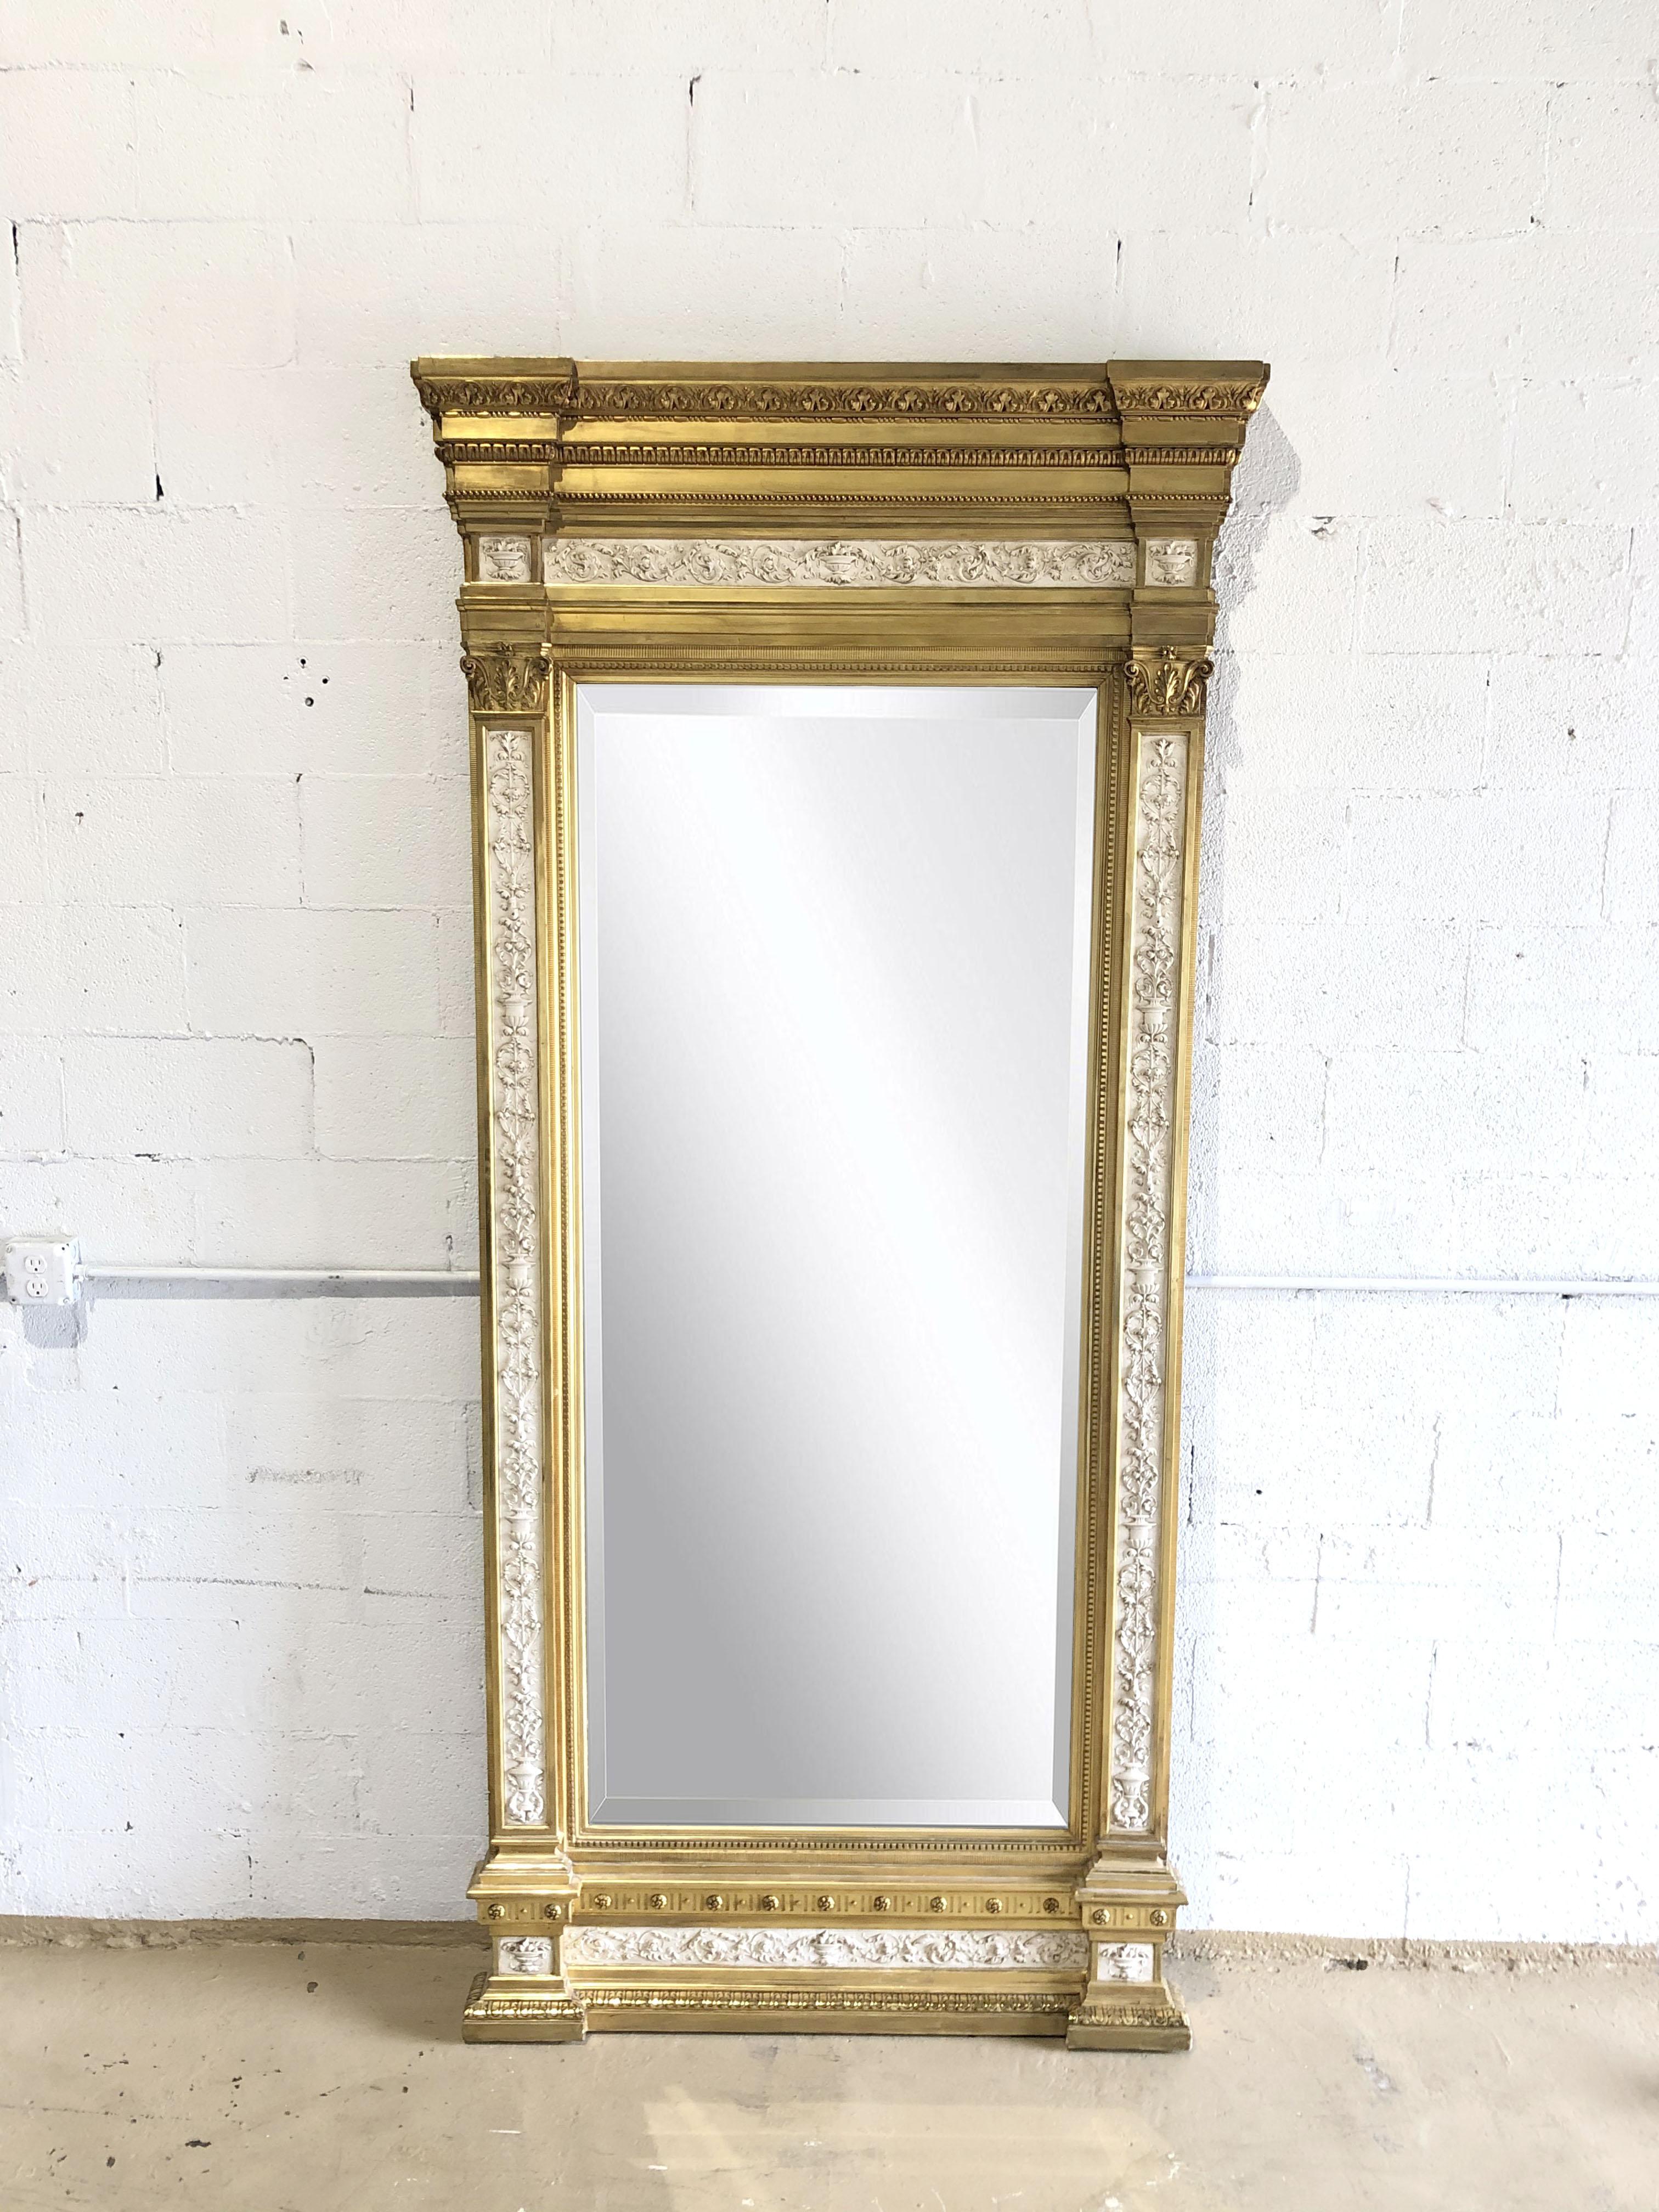 Wood Swedish Neoclassic Monumental Cream Painted and Parcel-Gilt Pier Mirror For Sale